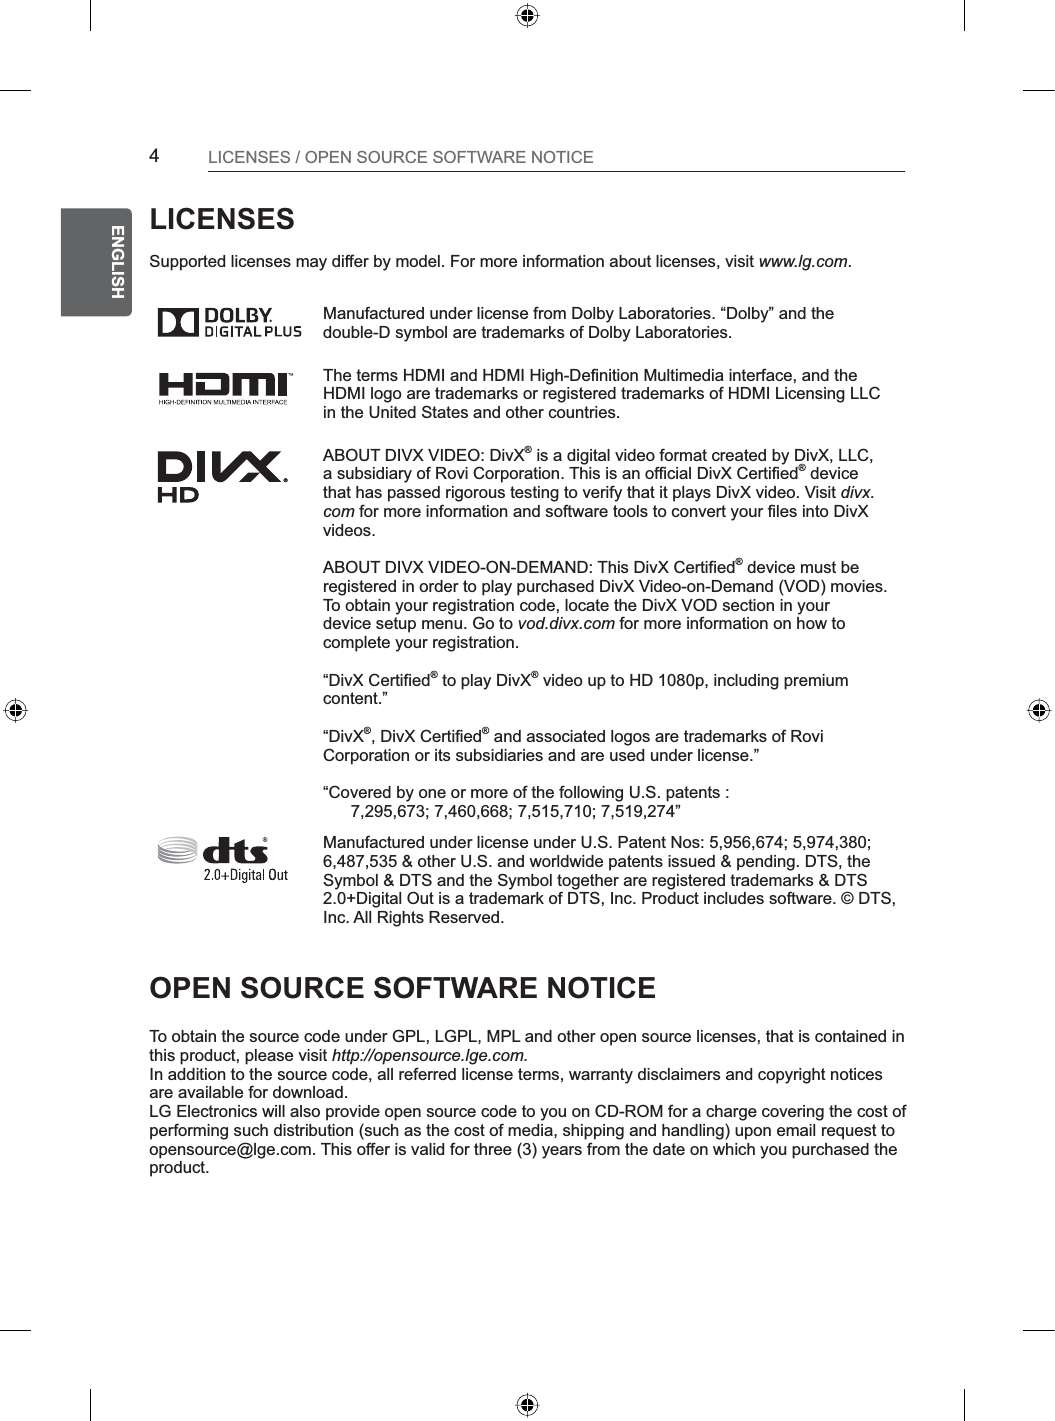 4ENGENGLISHLICENSES / OPEN SOURCE SOFTWARE NOTICELICENSESSupported licenses may differ by model. For more information about licenses, visit www.lg.com.Manufactured under license from Dolby Laboratories. “Dolby” and the double-D symbol are trademarks of Dolby Laboratories.The terms HDMI and HDMI High-Definition Multimedia interface, and the HDMI logo are trademarks or registered trademarks of HDMI Licensing LLC in the United States and other countries. ABOUT DIVX VIDEO: DivX® is a digital video format created by DivX, LLC,a subsidiary of Rovi Corporation. This is an official DivX Certified® devicethat has passed rigorous testing to verify that it plays DivX video. Visit divx.com for more information and software tools to convert your files into DivXvideos.ABOUT DIVX VIDEO-ON-DEMAND: This DivX Certified® device must beregistered in order to play purchased DivX Video-on-Demand (VOD) movies.To obtain your registration code, locate the DivX VOD section in yourdevice setup menu. Go to vod.divx.com for more information on how tocomplete your registration.“DivX Certified® to play DivX® video up to HD 1080p, including premiumcontent.”“DivX®, DivX Certified® and associated logos are trademarks of RoviCorporation or its subsidiaries and are used under license.”“Covered by one or more of the following U.S. patents :      7,295,673; 7,460,668; 7,515,710; 7,519,274”Manufactured under license under U.S. Patent Nos: 5,956,674; 5,974,380; 6,487,535 &amp; other U.S. and worldwide patents issued &amp; pending. DTS, the Symbol &amp; DTS and the Symbol together are registered trademarks &amp; DTS 2.0+Digital Out is a trademark of DTS, Inc. Product includes software. © DTS, Inc. All Rights Reserved.OPEN SOURCE SOFTWARE NOTICETo obtain the source code under GPL, LGPL, MPL and other open source licenses, that is contained in this product, please visit http://opensource.lge.com.In addition to the source code, all referred license terms, warranty disclaimers and copyright notices are available for download.LG Electronics will also provide open source code to you on CD-ROM for a charge covering the cost of performing such distribution (such as the cost of media, shipping and handling) upon email request to opensource@lge.com. This offer is valid for three (3) years from the date on which you purchased the product.